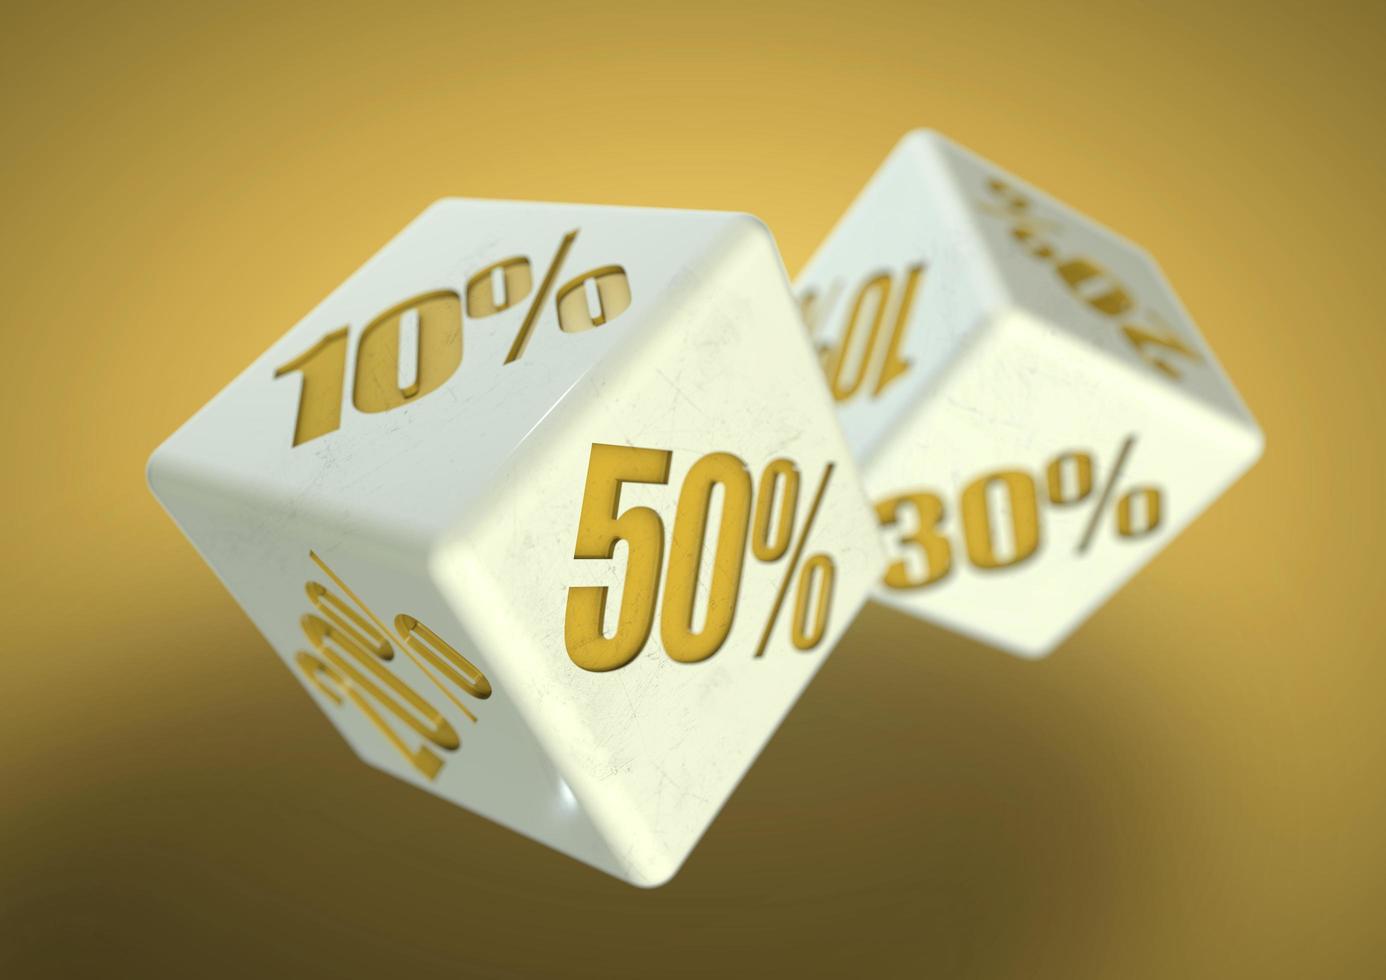 Two dice rolling. Percentage savings on each face. Discount, deal, sale, save money photo